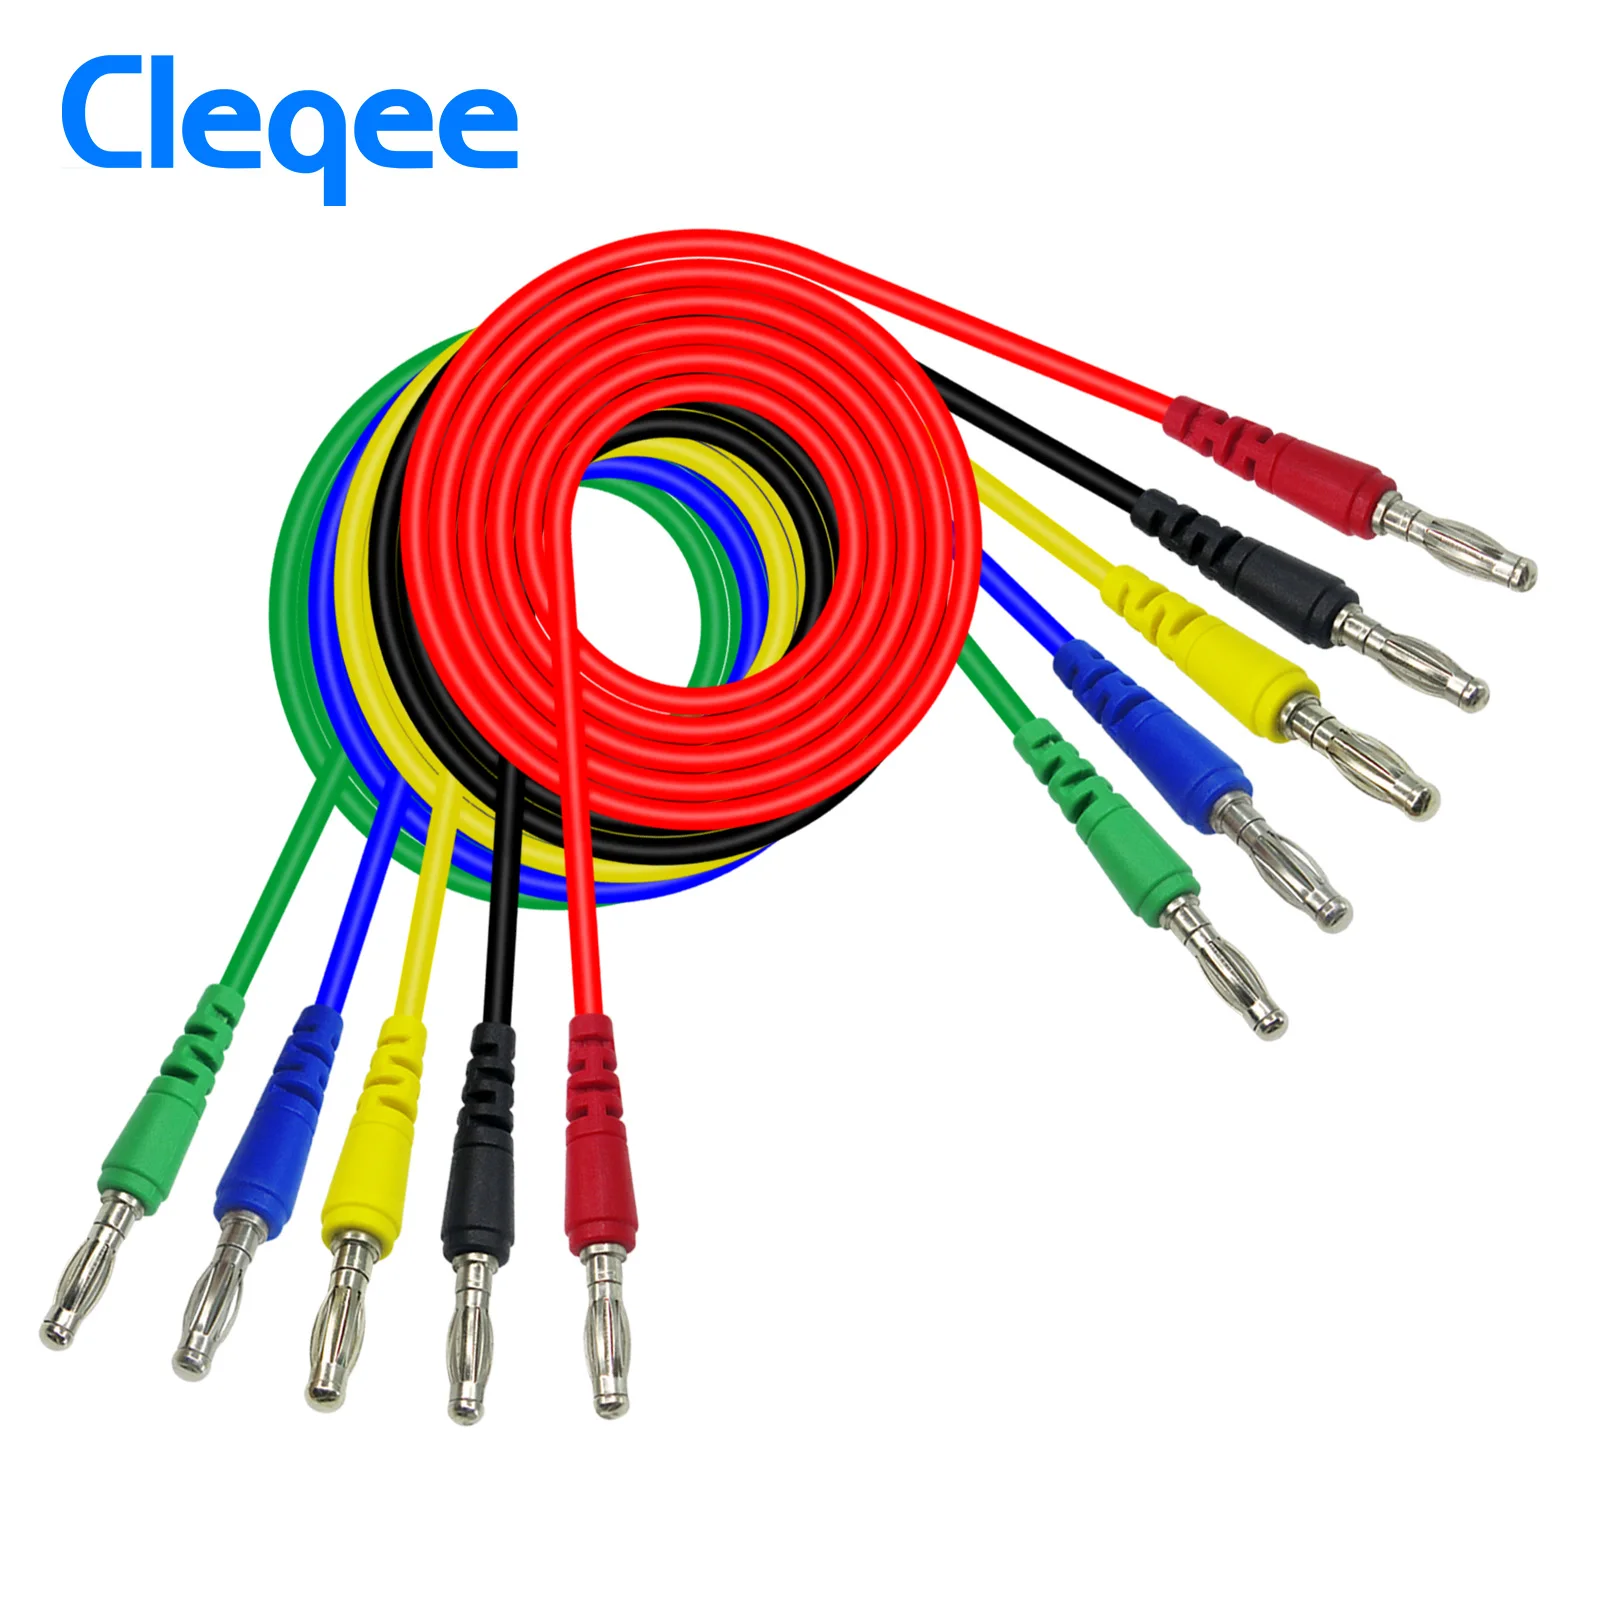 Cleqee Multimeter Test Leads Kit Safety Piercing Probe 4mm Banana  Stain... - $228.15